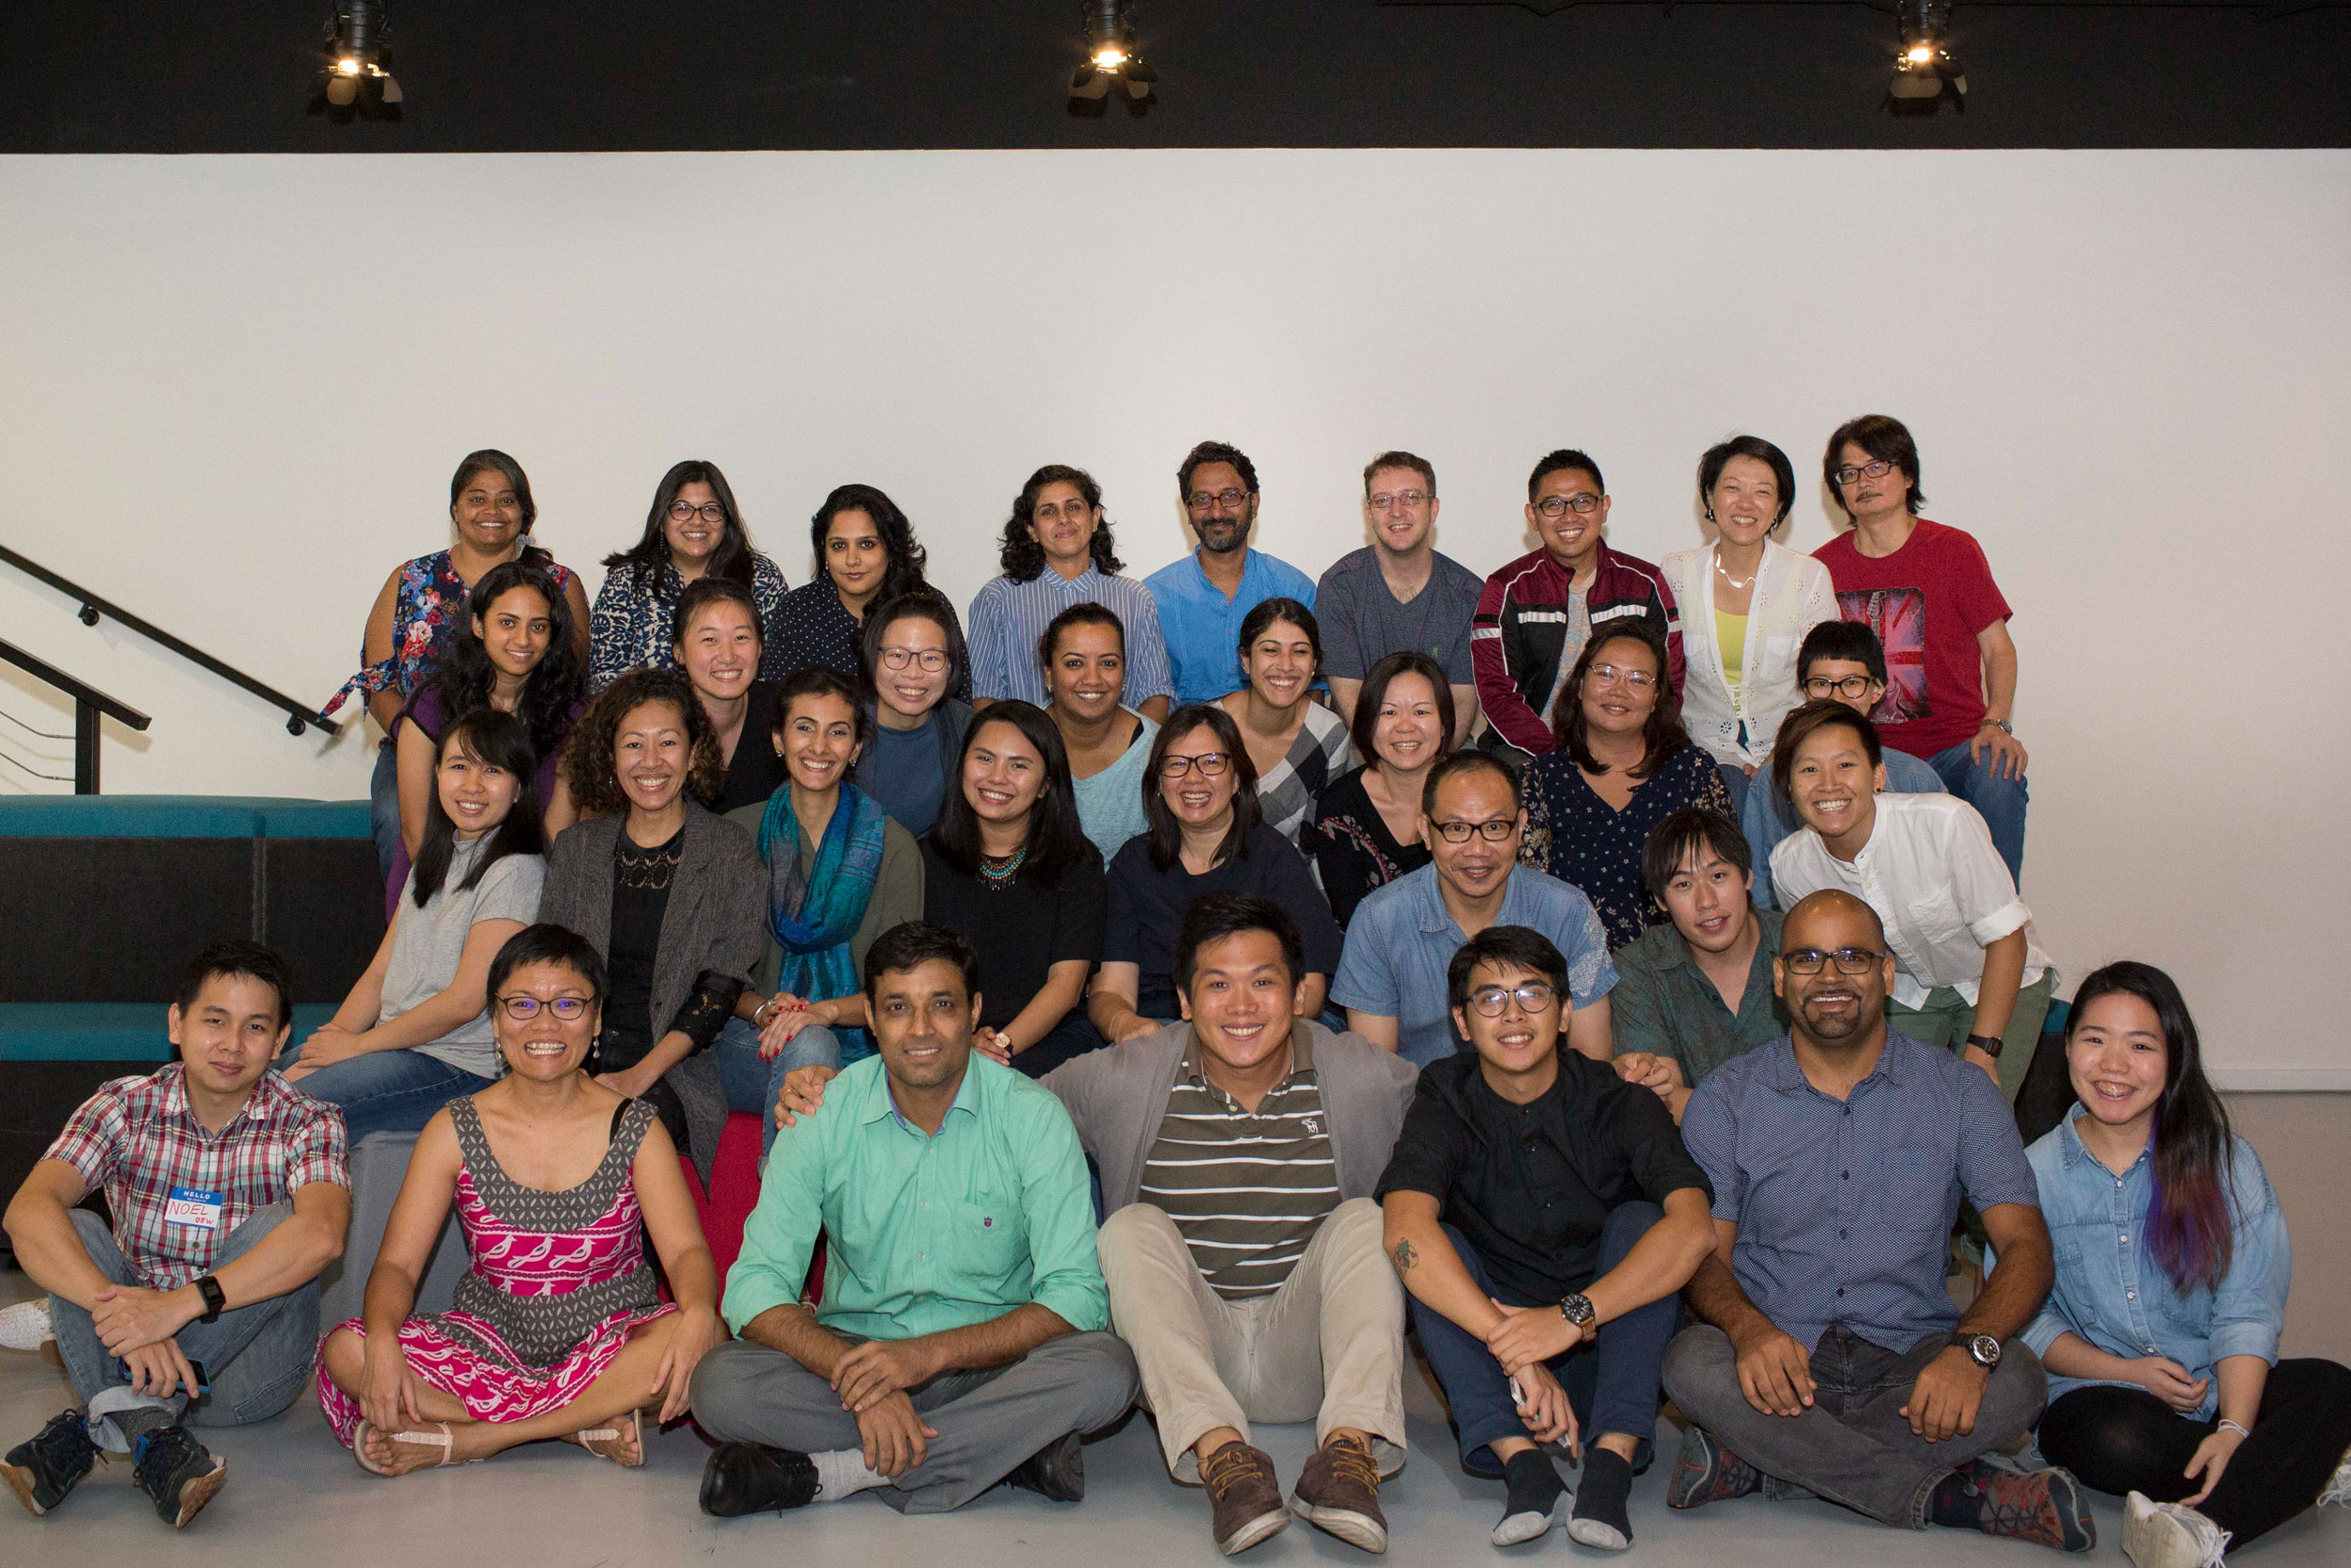 Group photo of storytellers and our better world team members